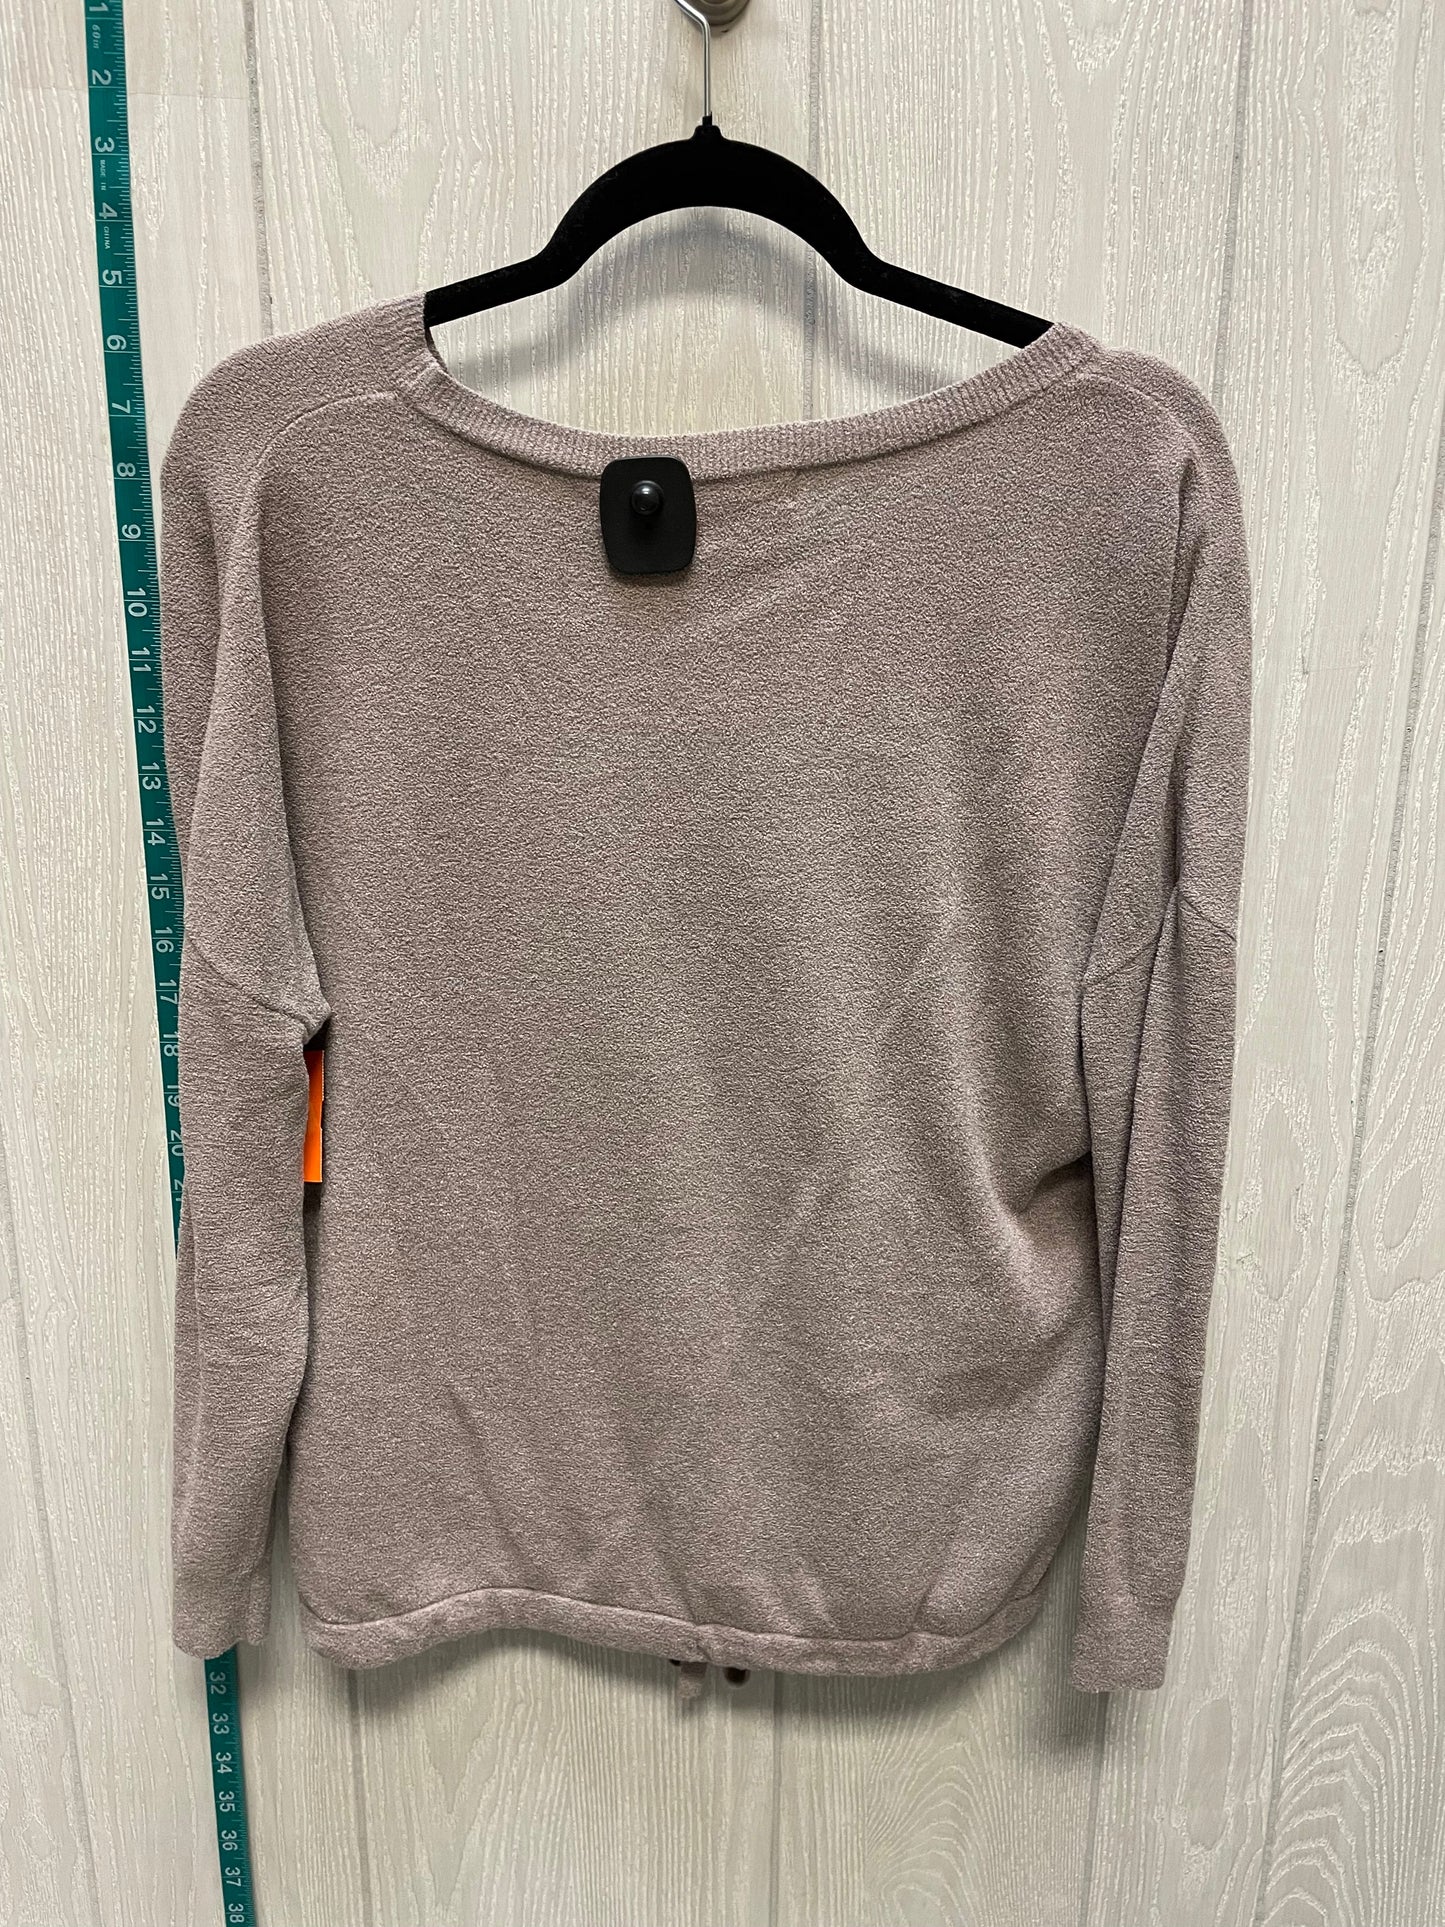 Taupe Top Long Sleeve Barefoot Dreams, Size Xs